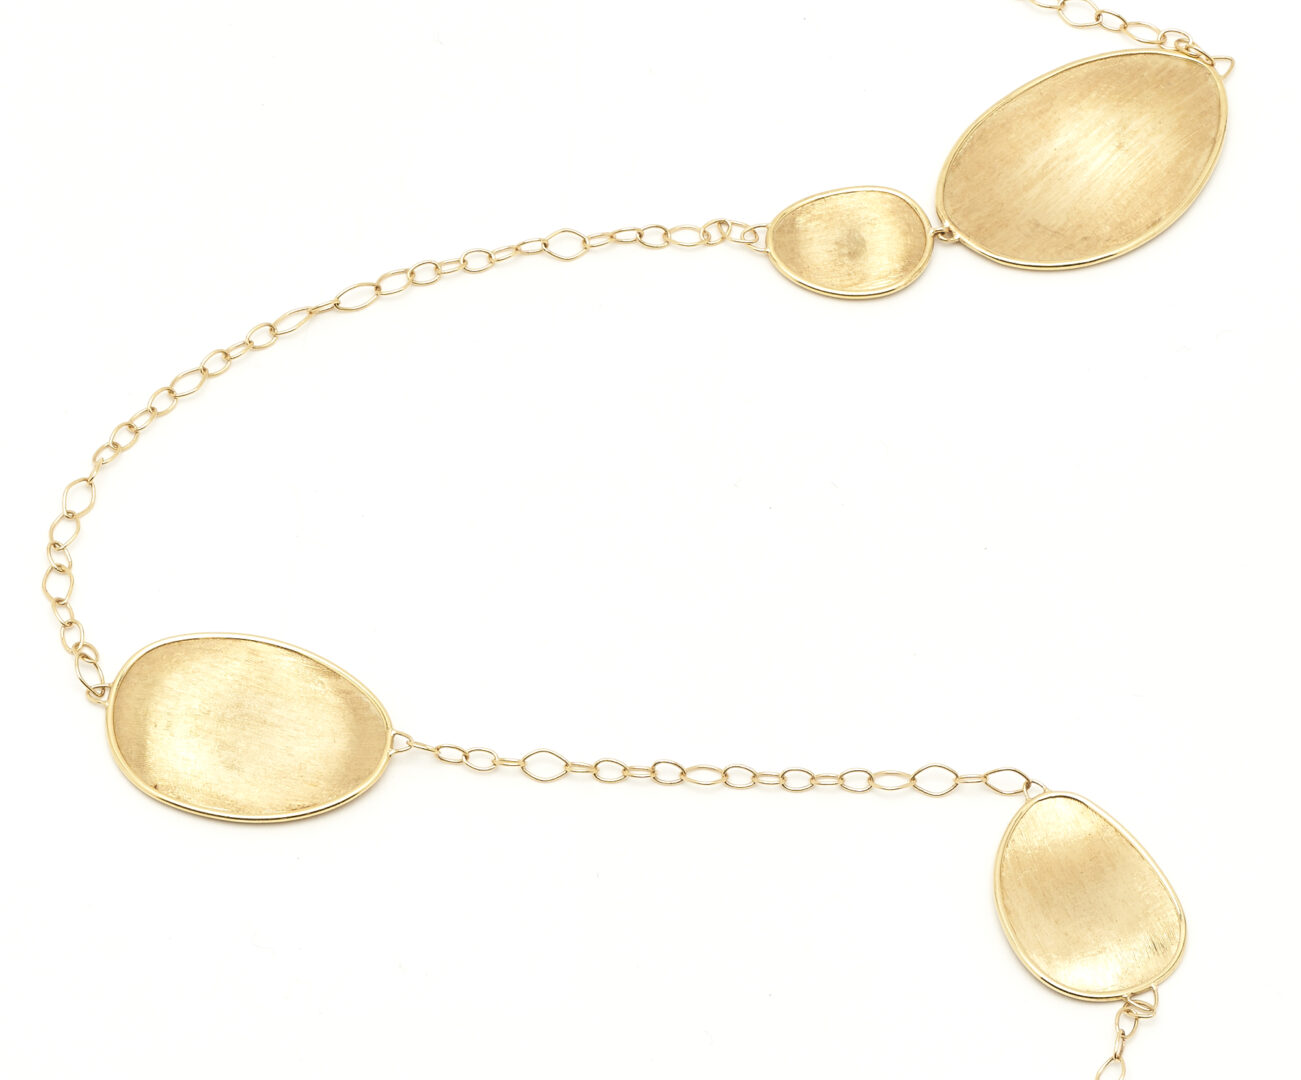 Lot 776: Marco Bicego Lunaria Collection 18K Yellow Gold Bead Necklace